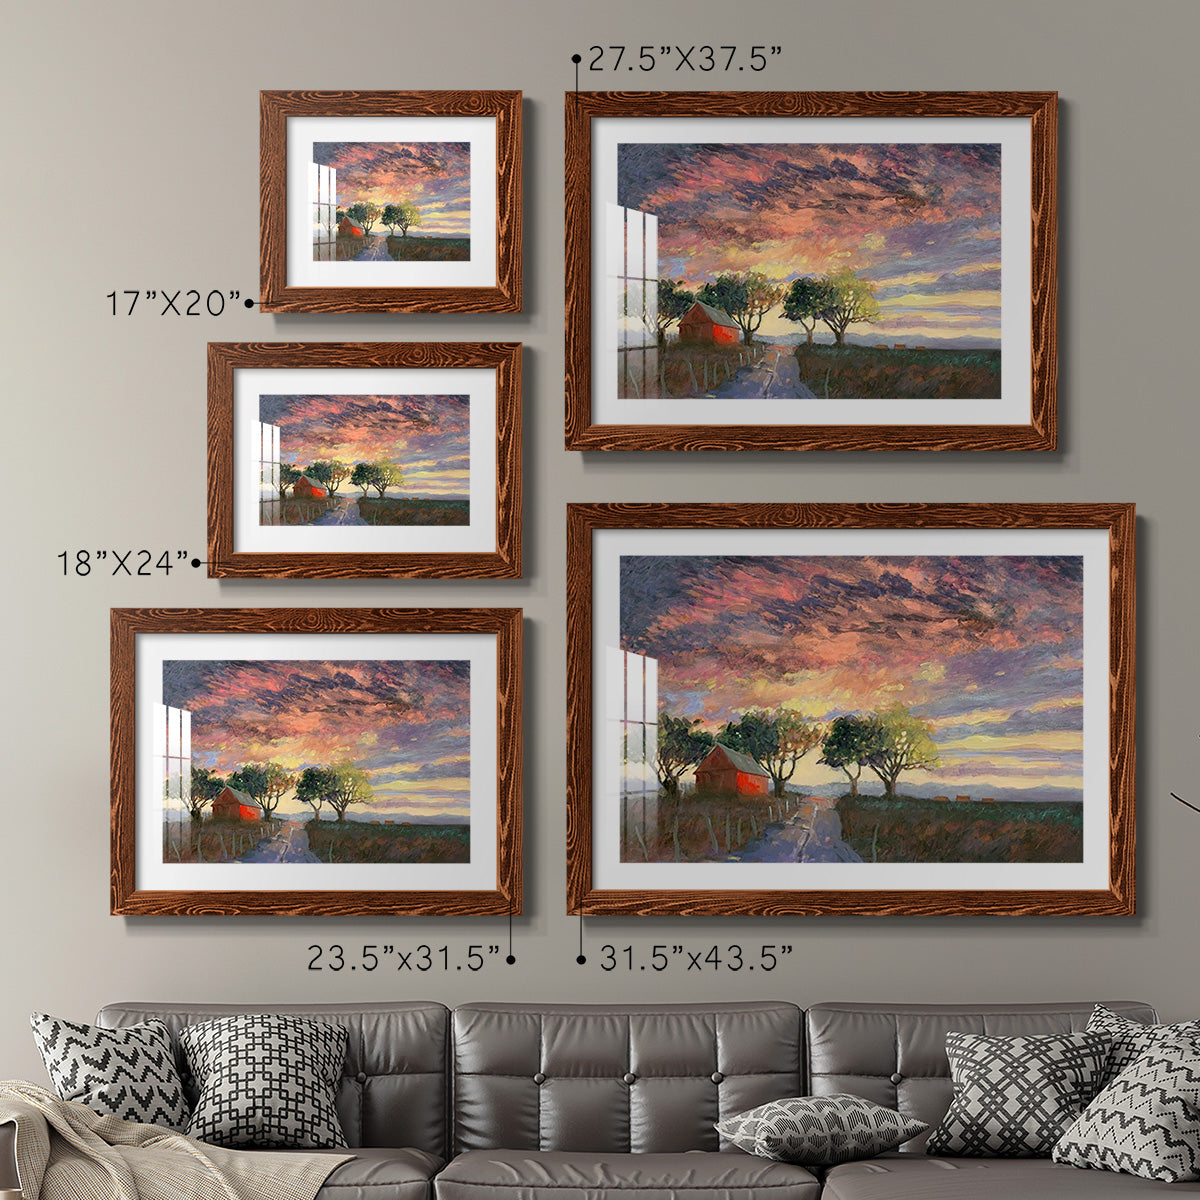 Fire in the Sky-Premium Framed Print - Ready to Hang